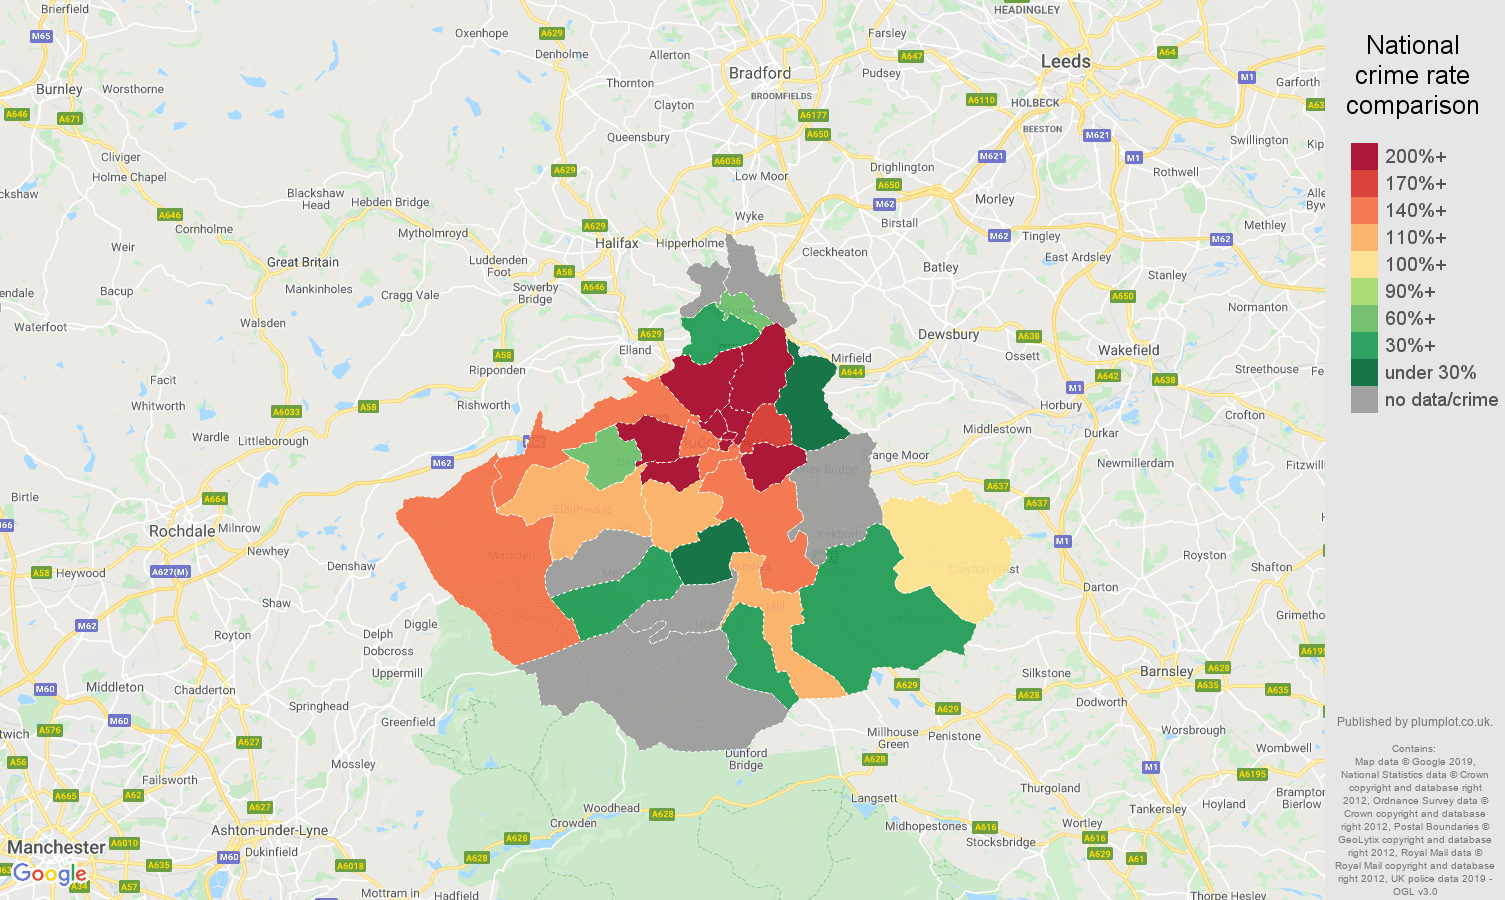 Huddersfield possession of weapons crime rate comparison map